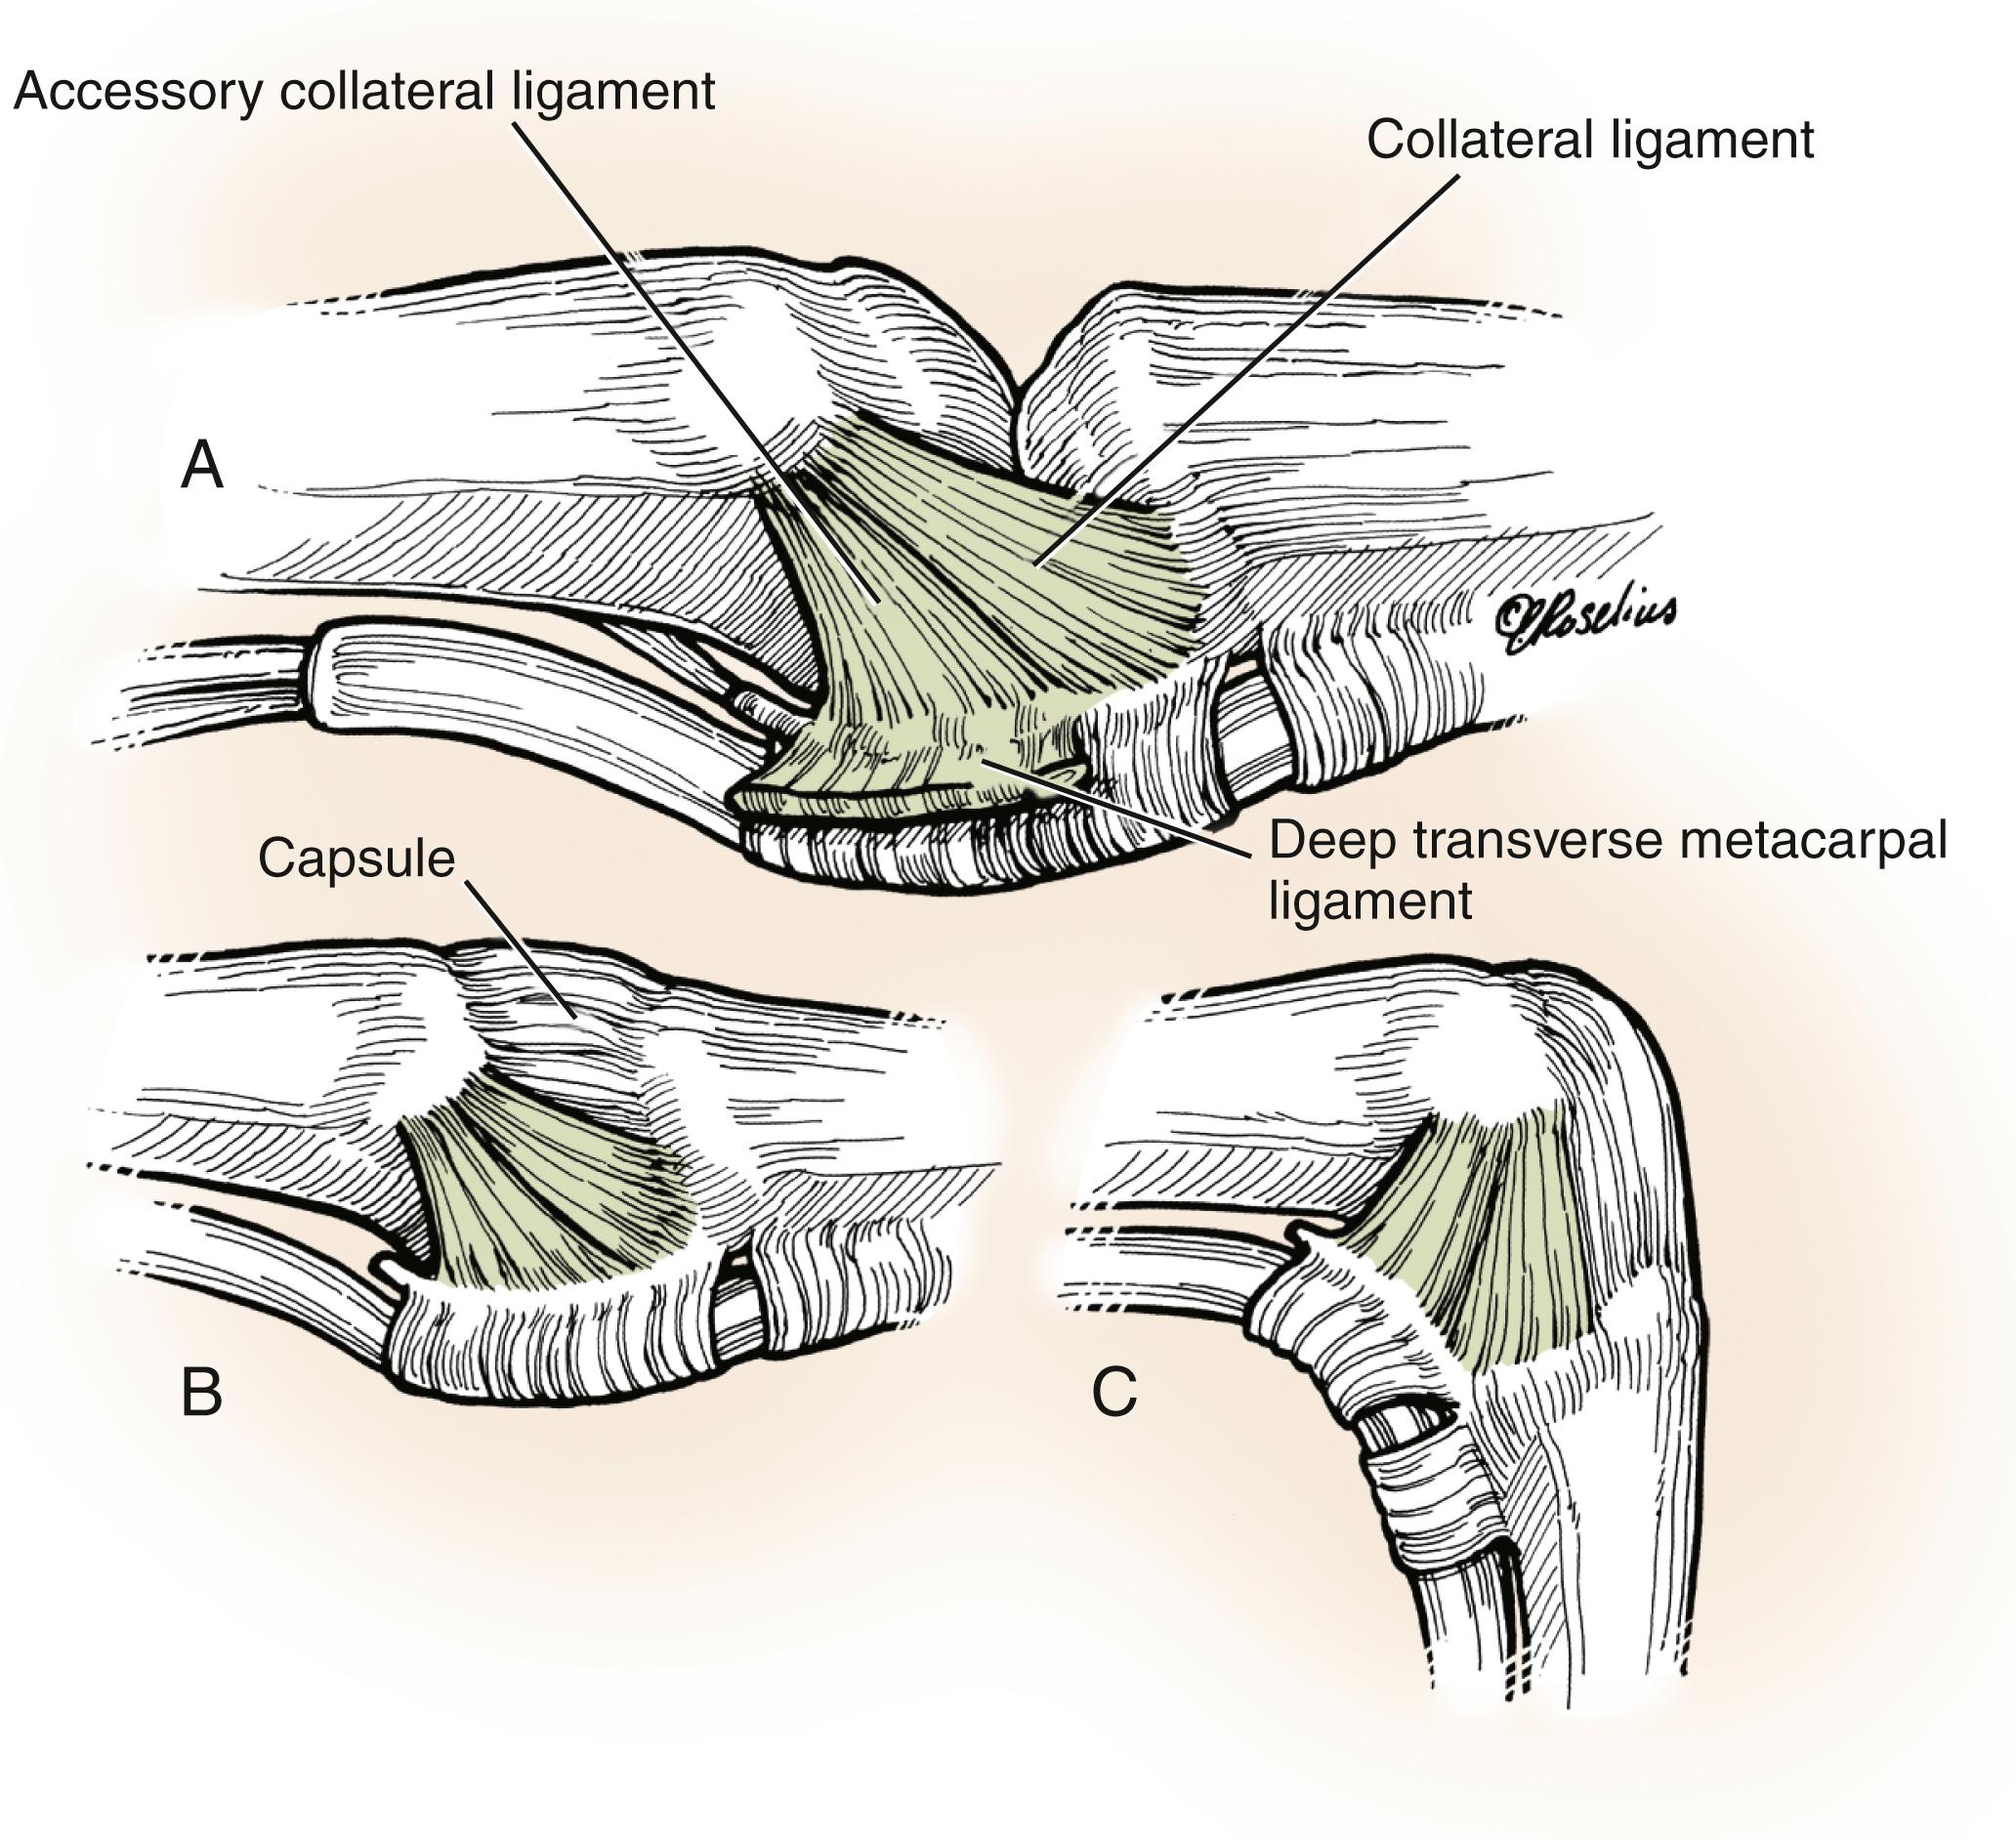 Fig. 10.1, Ligamentous anatomy of the metacarpophalangeal (MP) joint. (A), The MP joint has an accessory and a proper collateral ligament on the radial and ulnar aspect of the joint. A capsule covers the dorsal aspect of the joint. In extension, the proper collateral ligament is lax, as is the dorsal capsule (B) , whereas in flexion, the proper collateral ligament and dorsal capsule are taut (C) .